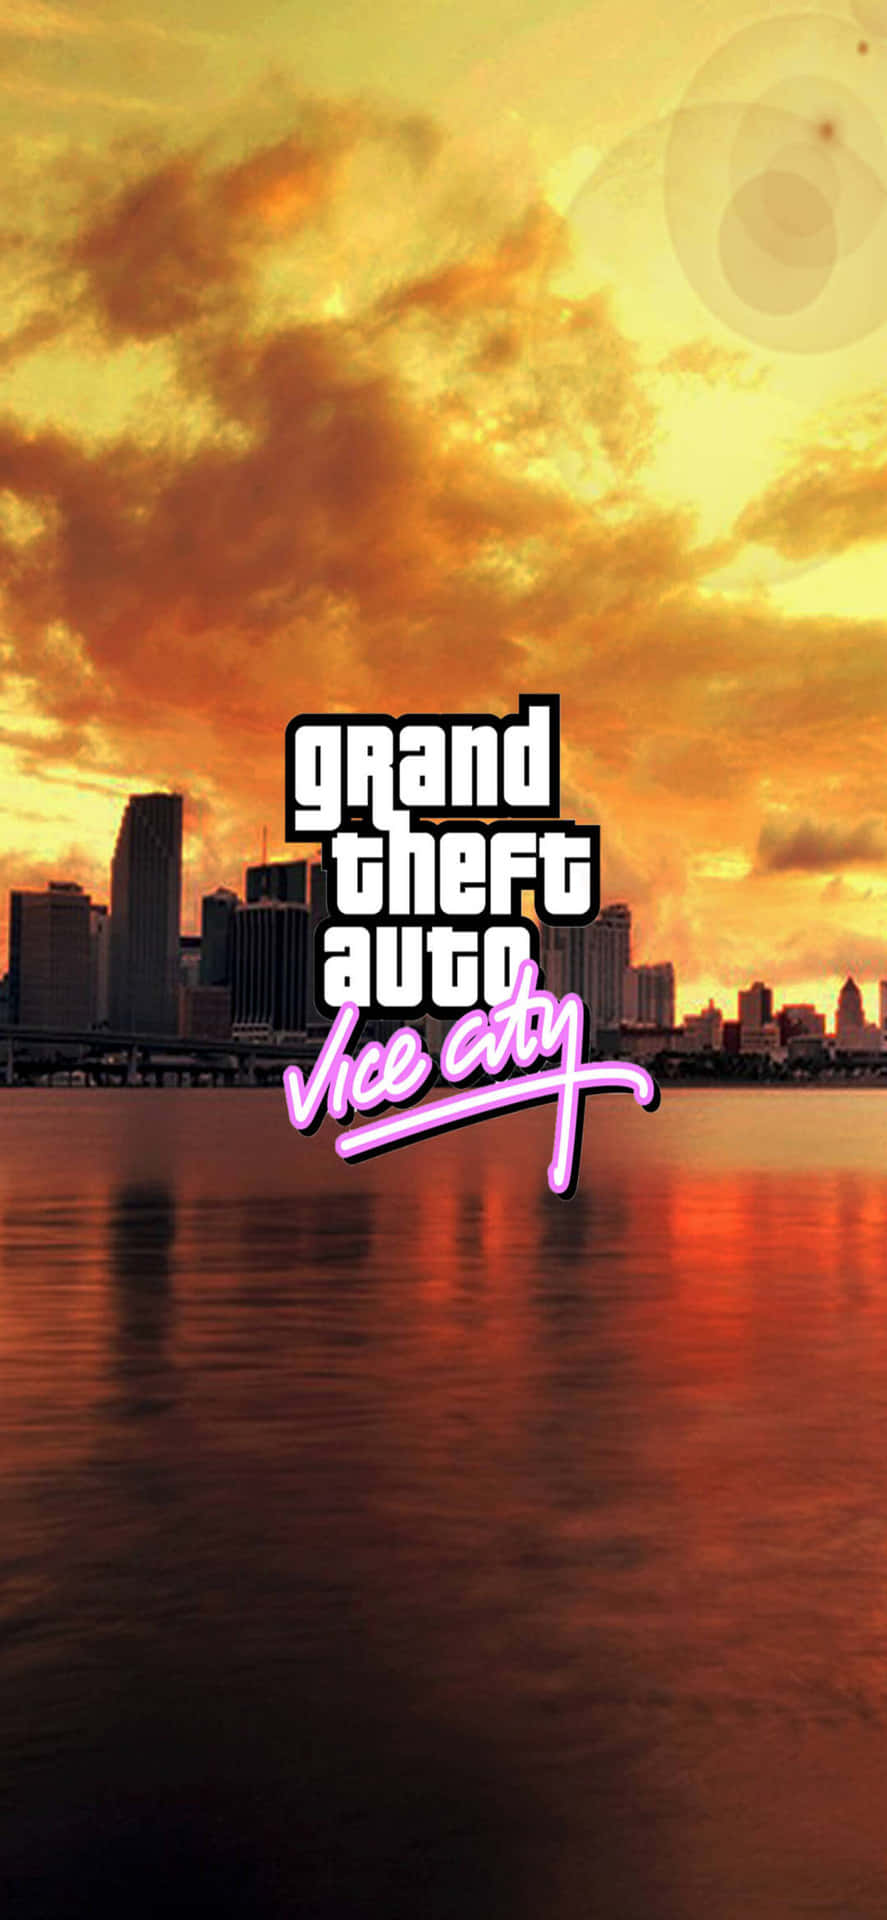 Iphone Xs Max Grand Theft Auto V Background Vice City Poster Beach Poster